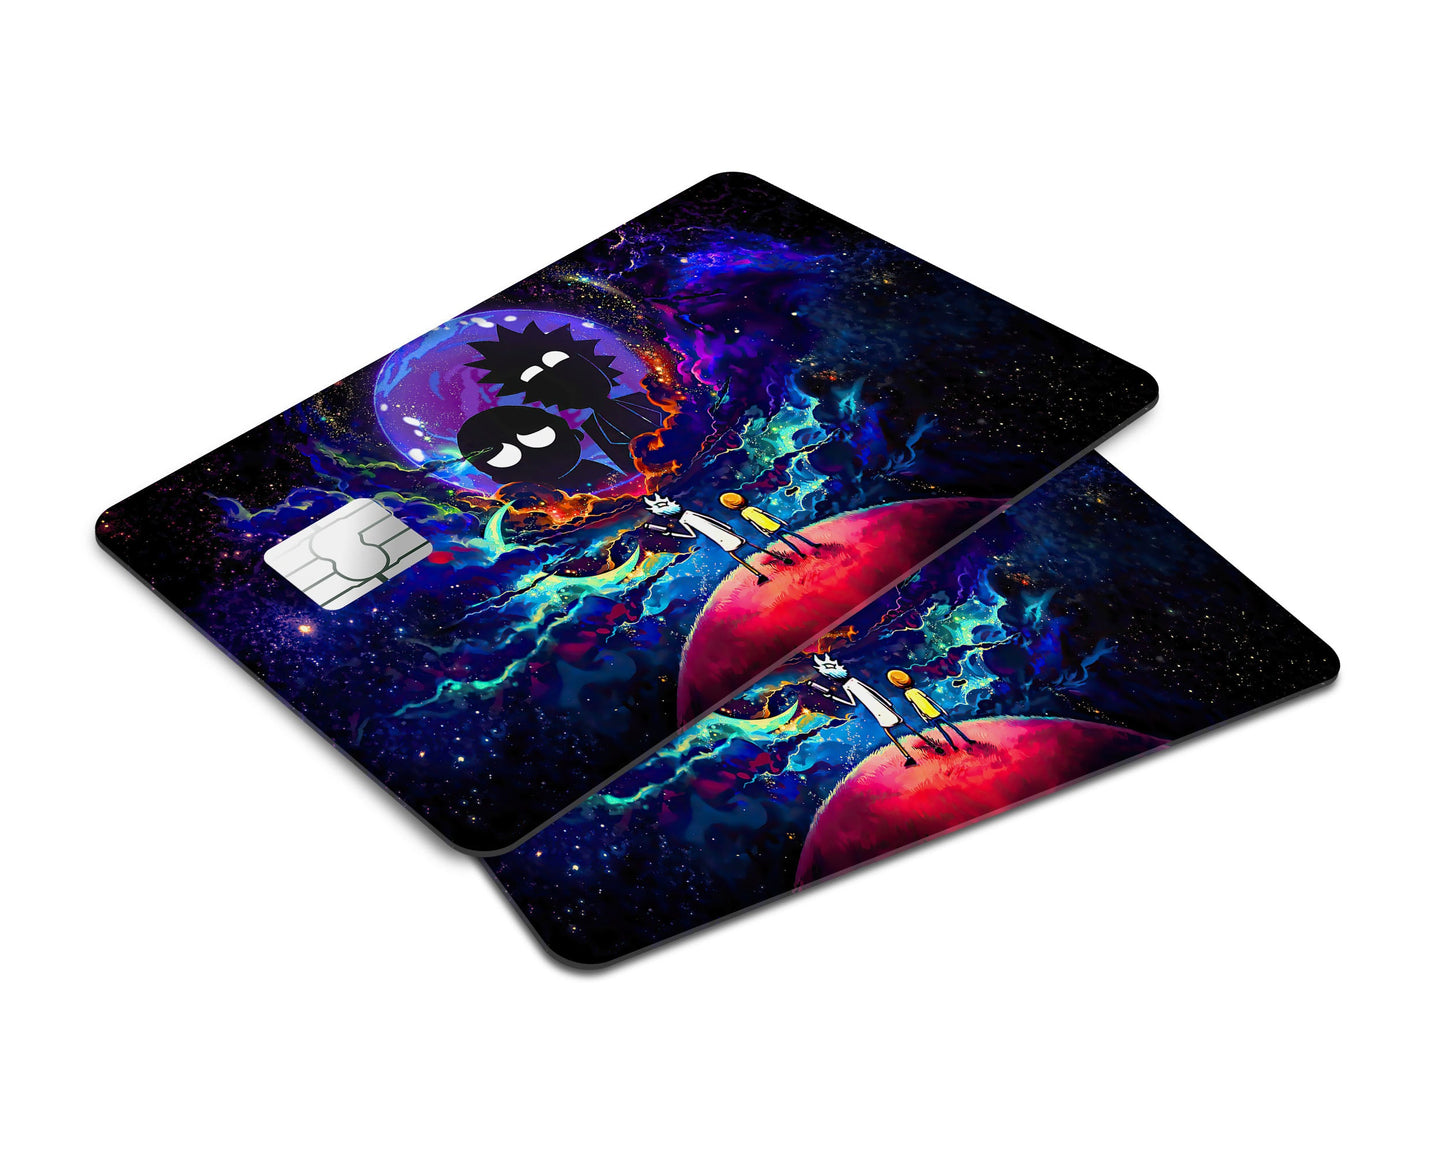 Anime Town Creations Credit Card Rick and Morty Space Exploration Window Skins - Anime Rick and Morty Credit Card Skin